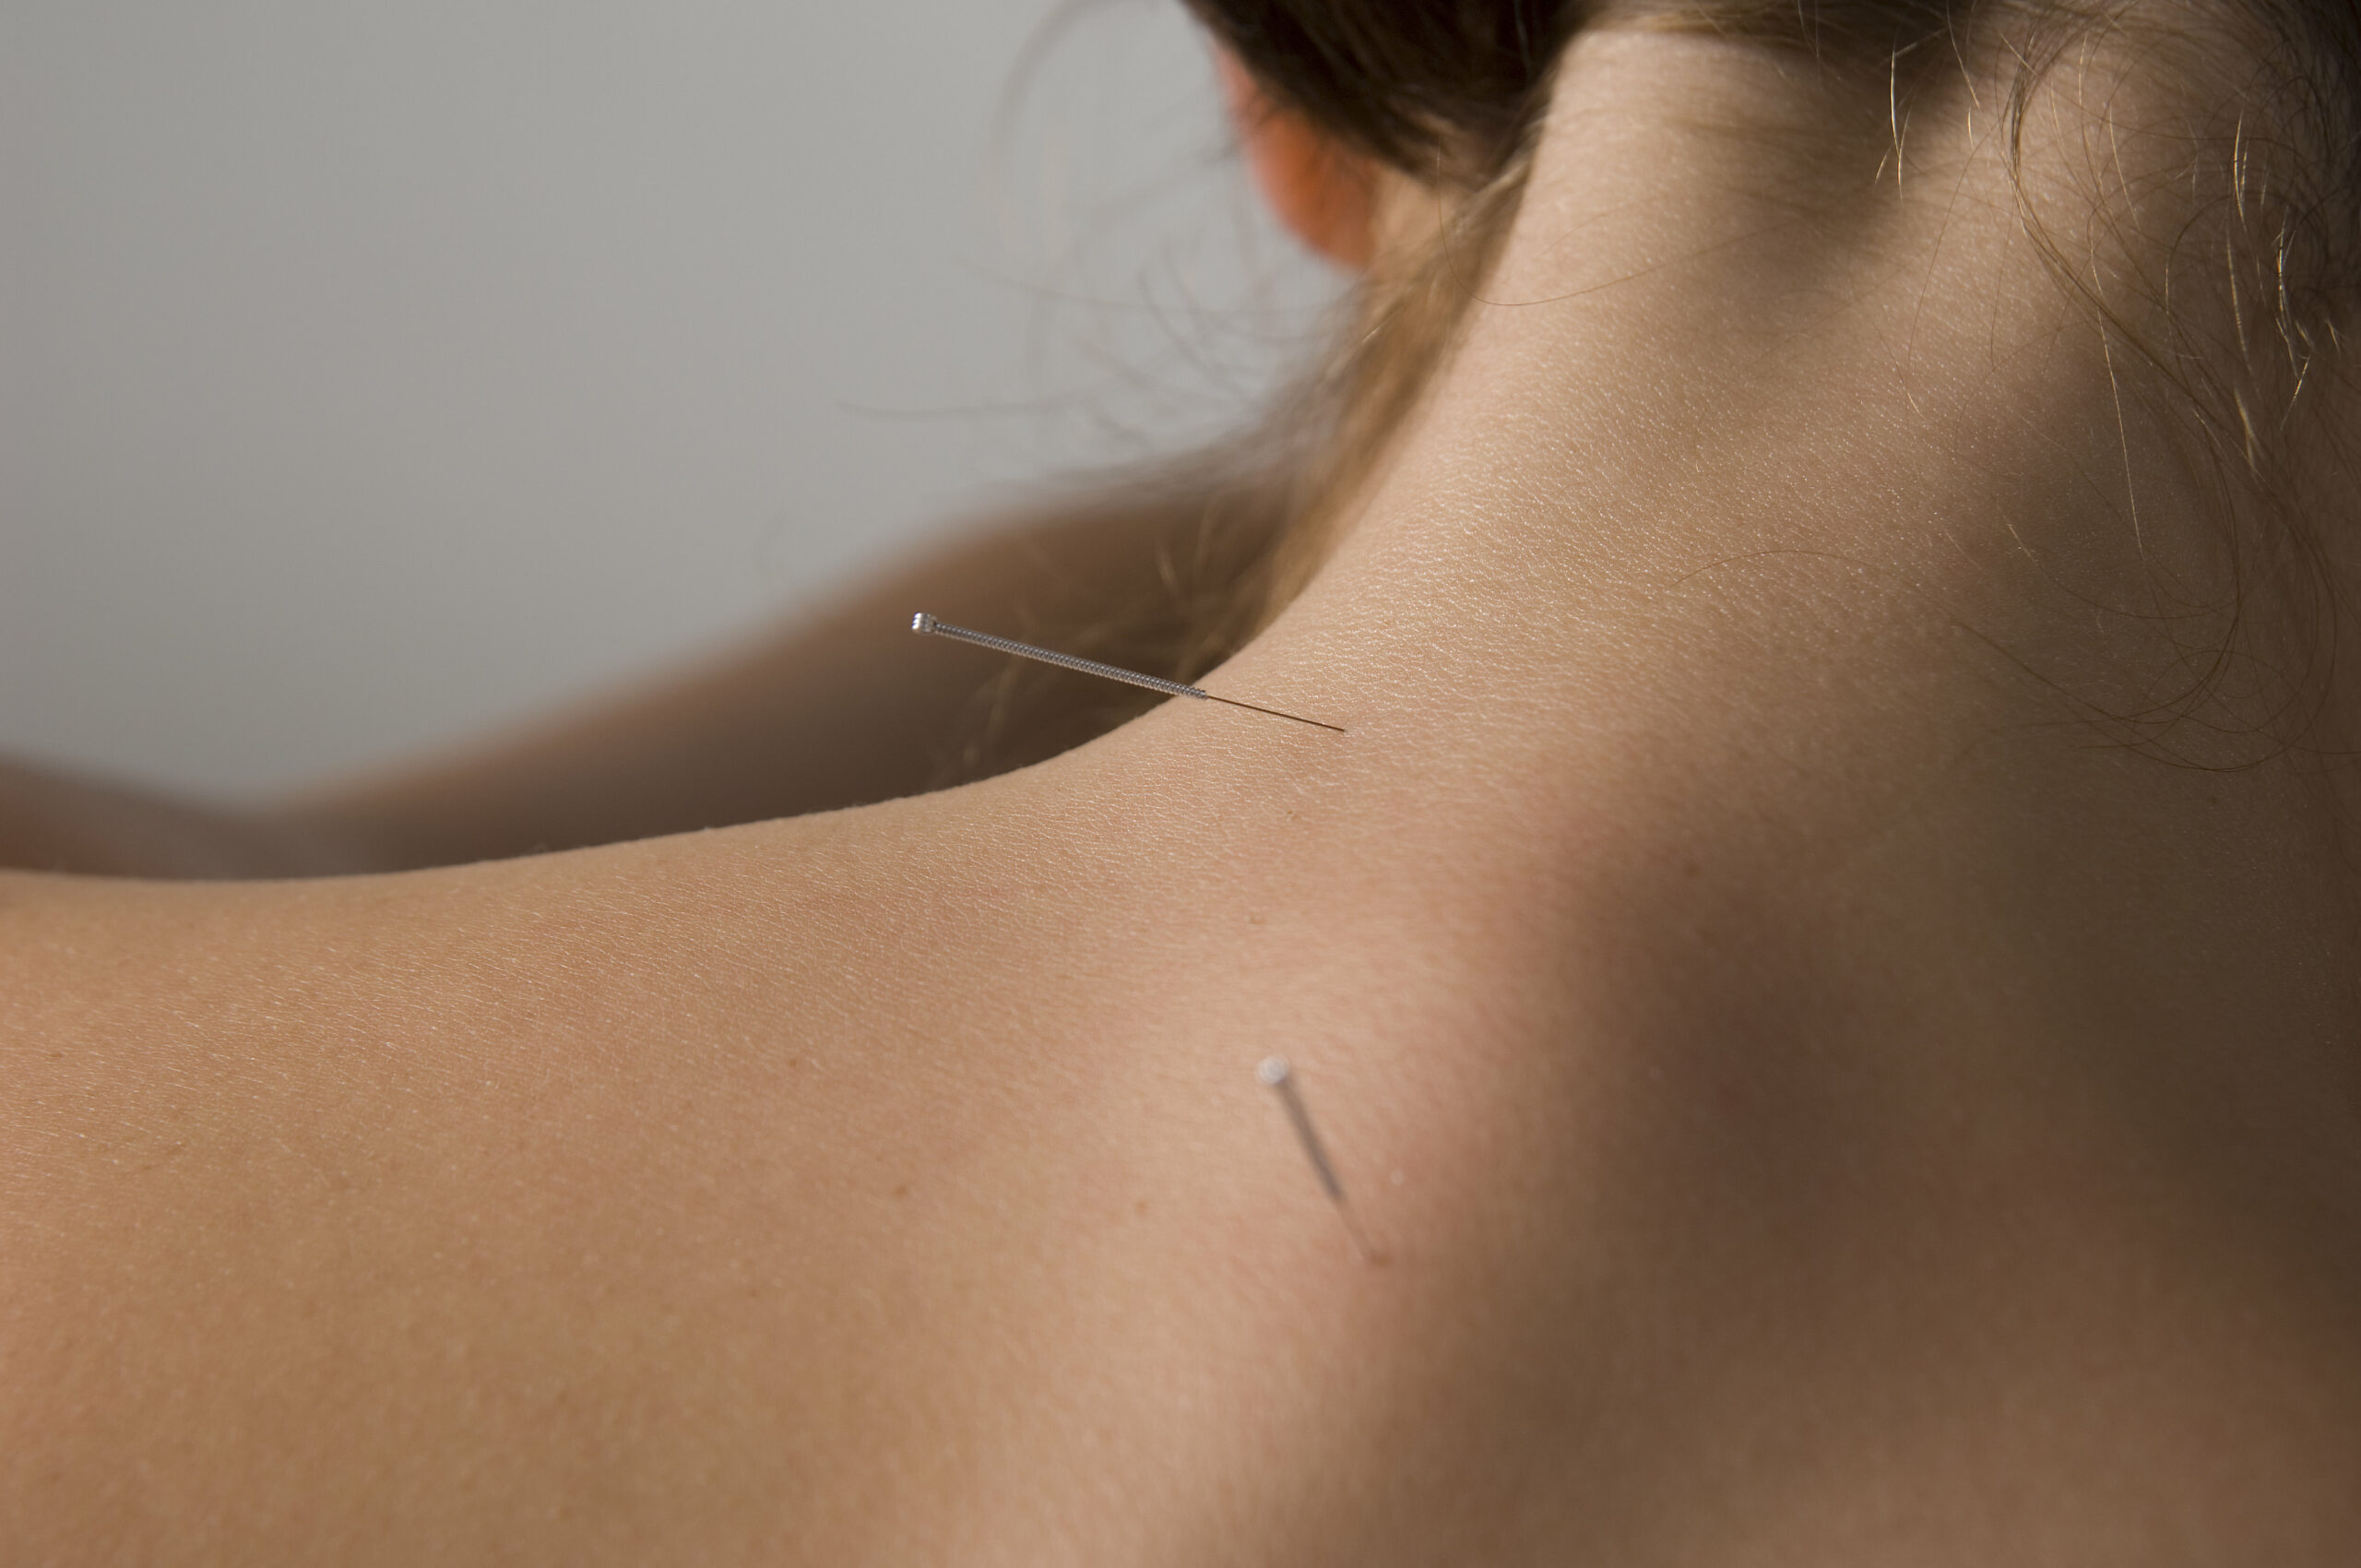 Acupuncture needles inserted into neck.